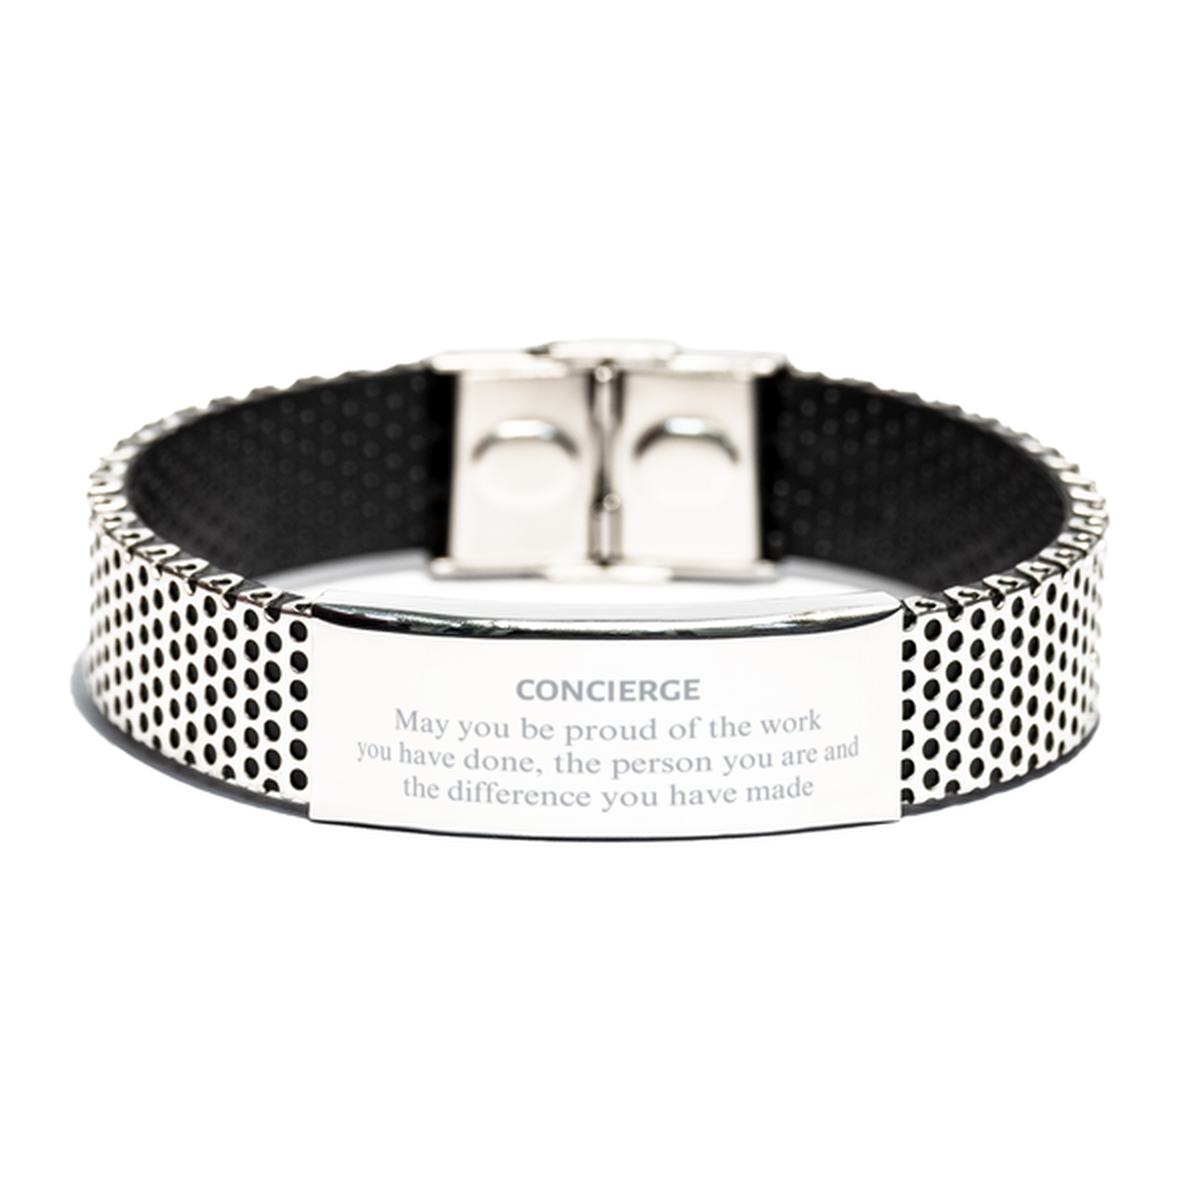 Concierge May you be proud of the work you have done, Retirement Concierge Stainless Steel Bracelet for Colleague Appreciation Gifts Amazing for Concierge